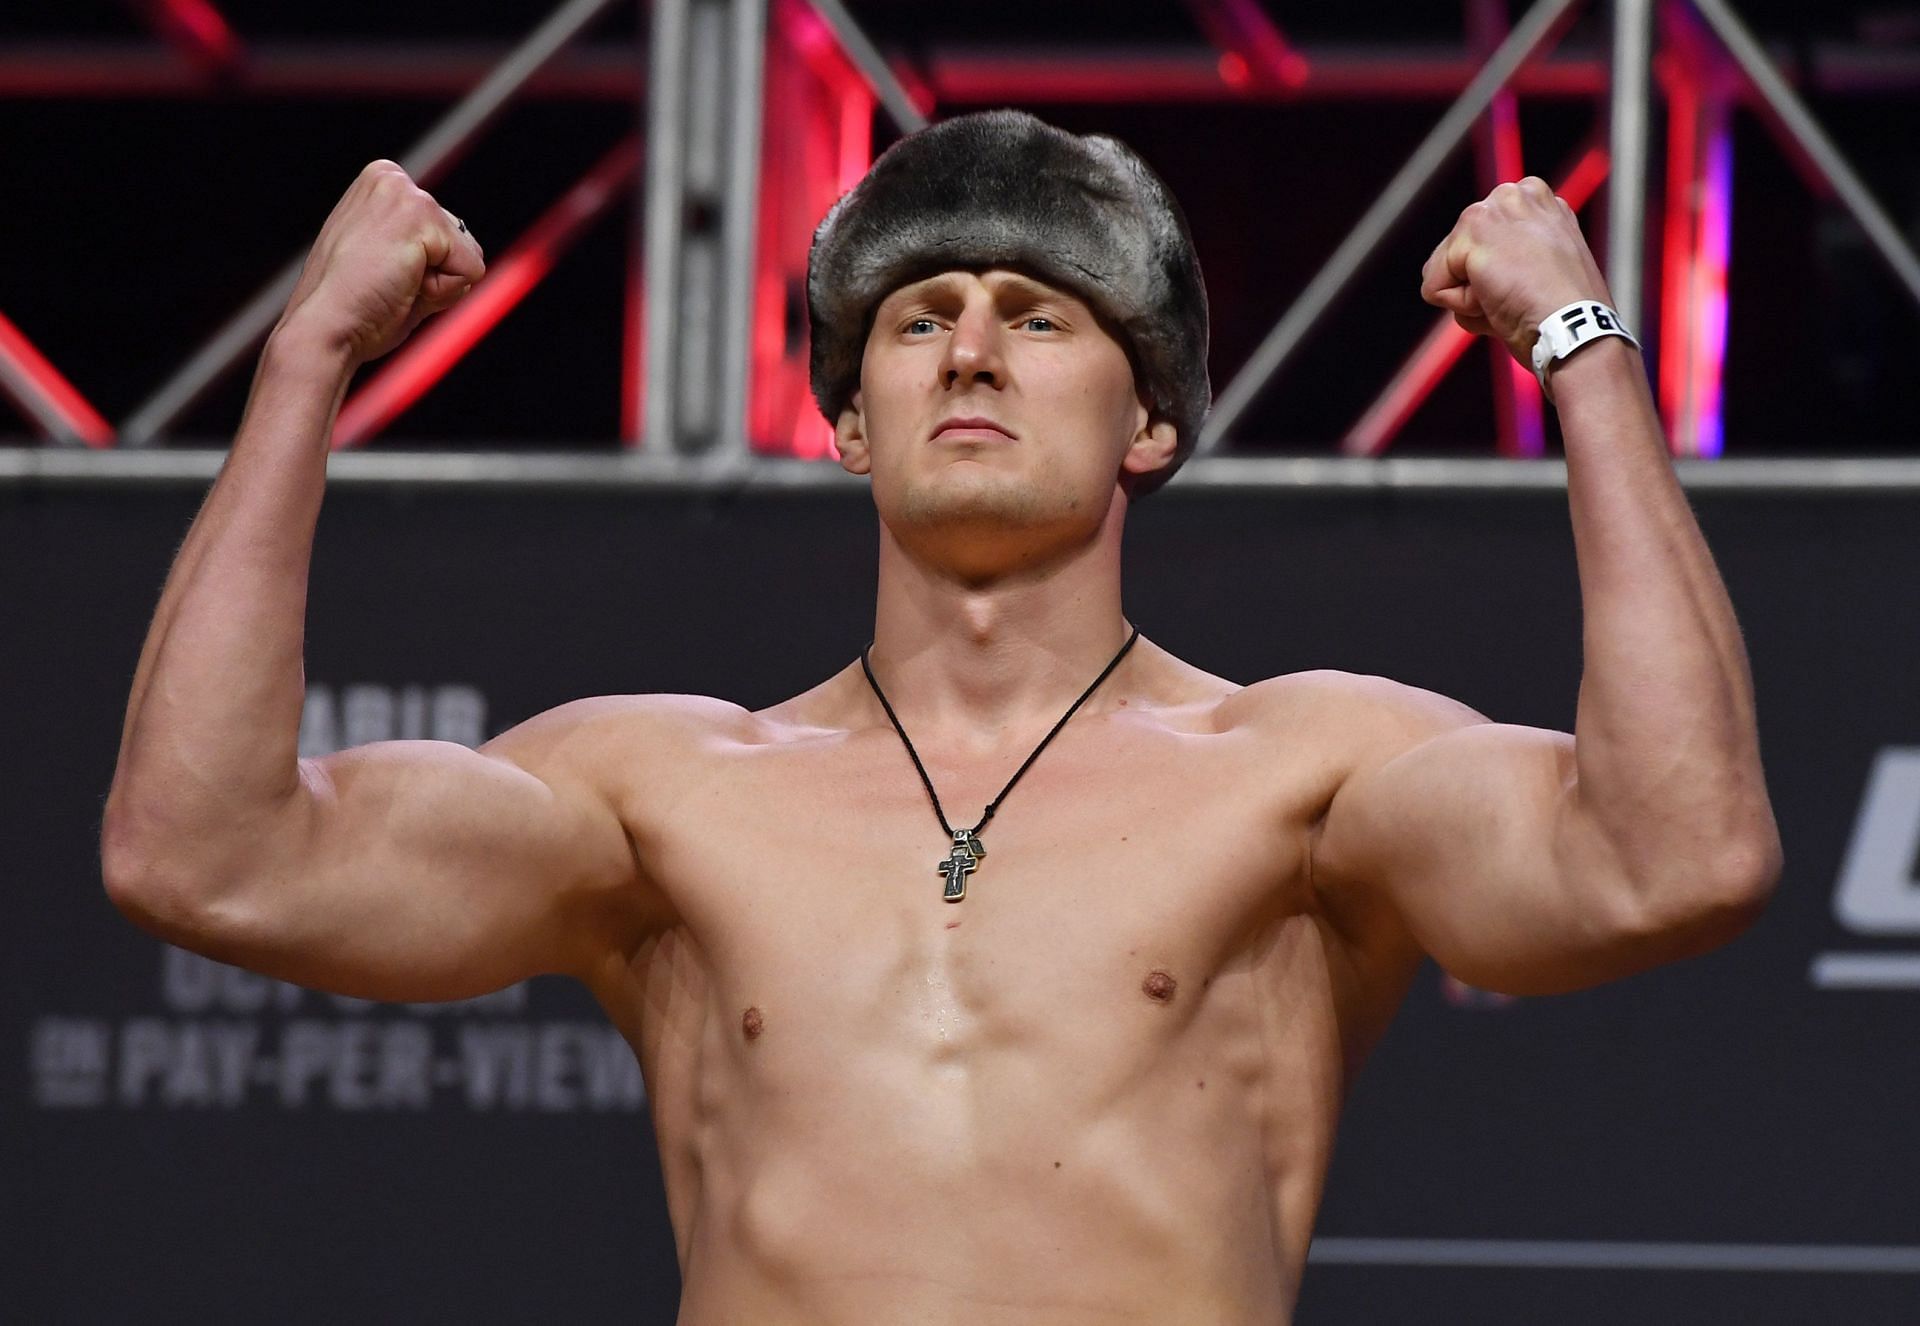 Alexander Volkov will be hopeful of taking out AlexanderRomanov this weekend